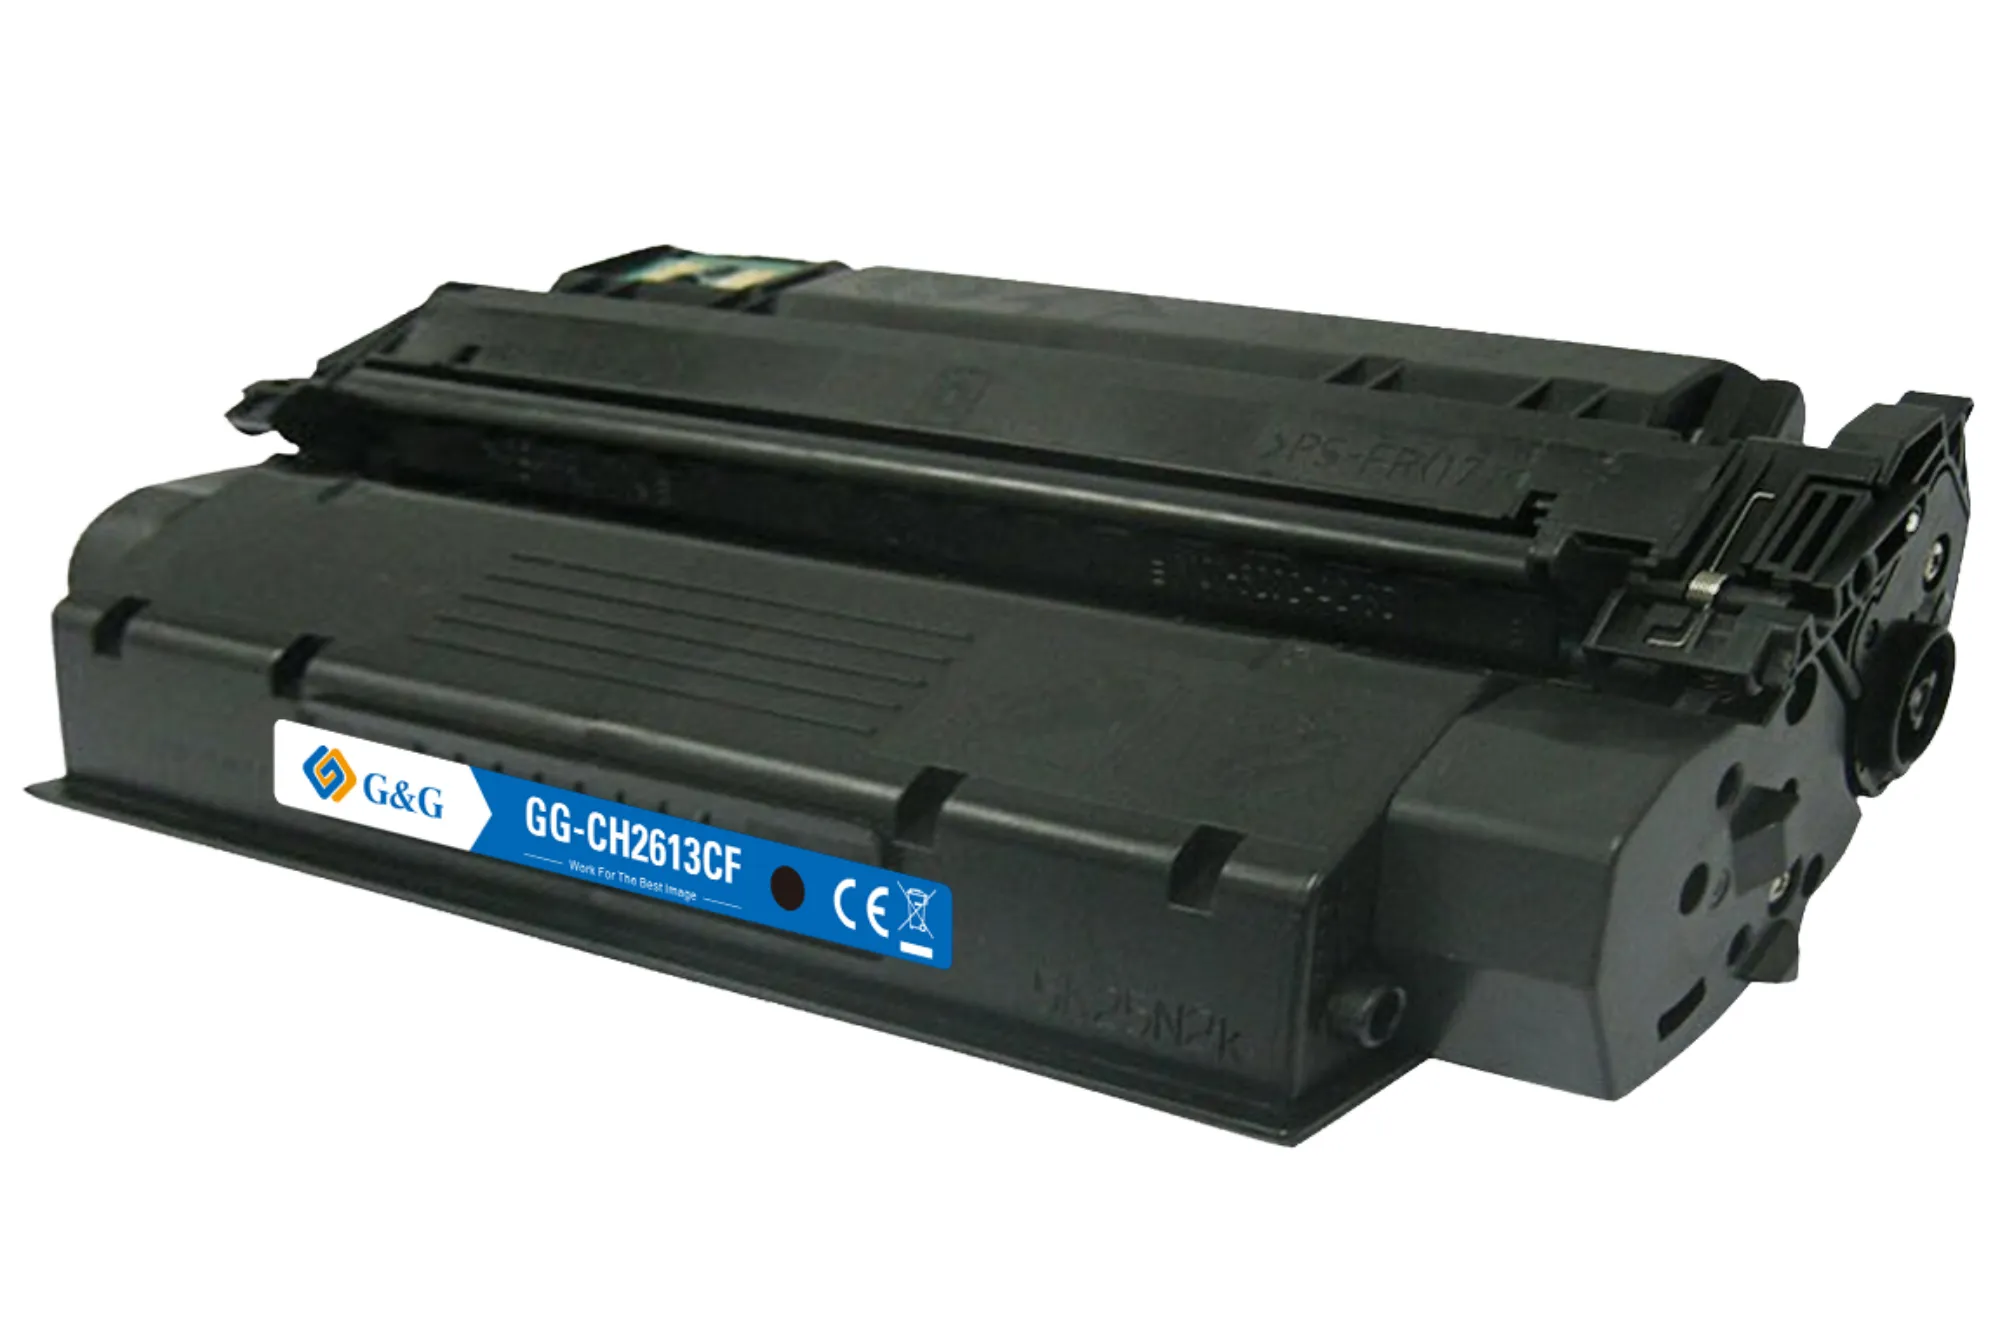 G&G - Your Trusted Partner for Remanufactured Cartridges